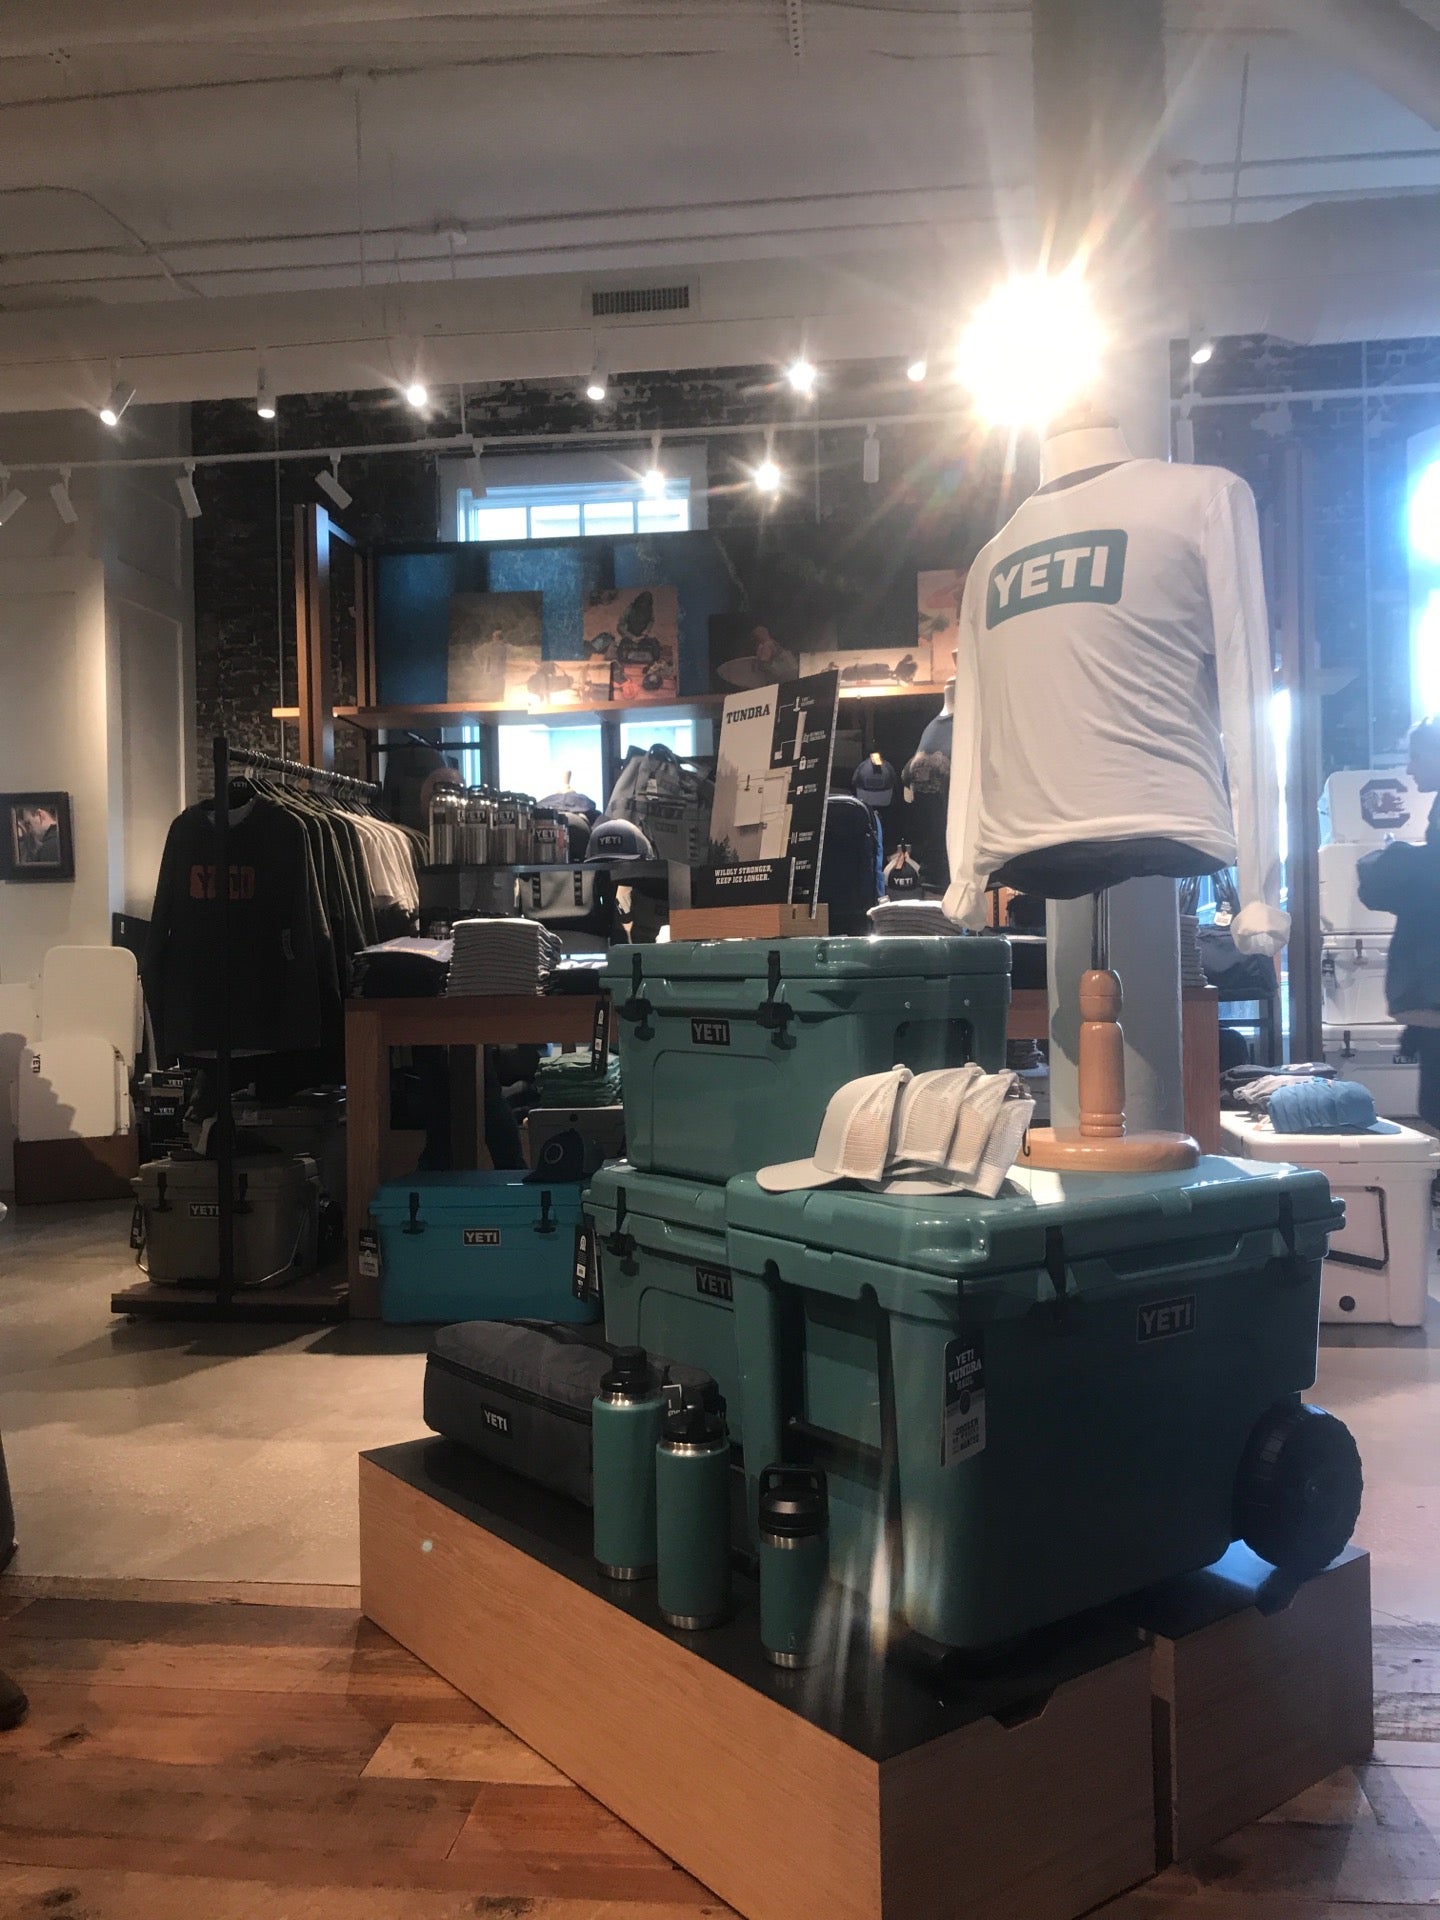 YETI Launches Charleston Store, Aims at National Expansion